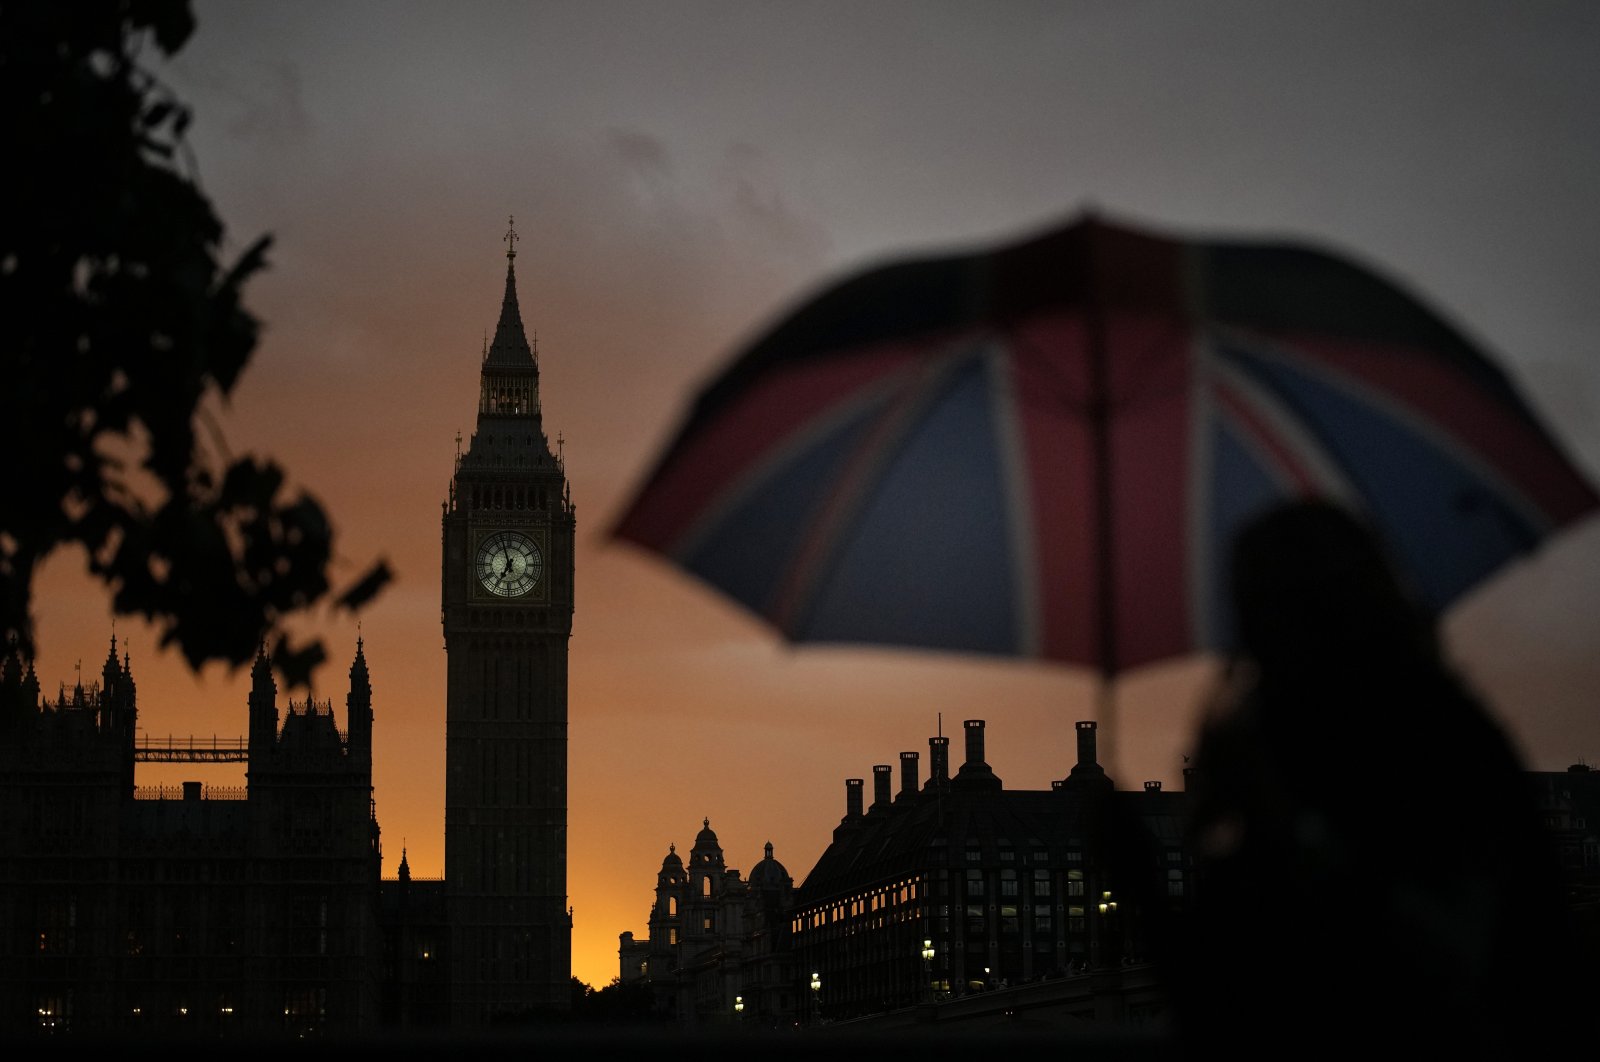 A woman walks past Big Ben as she waits in line to pay respect to the late Queen Elizabeth II at Westminster Hall in London, England, Sept. 18, 2022. (AP Photo)